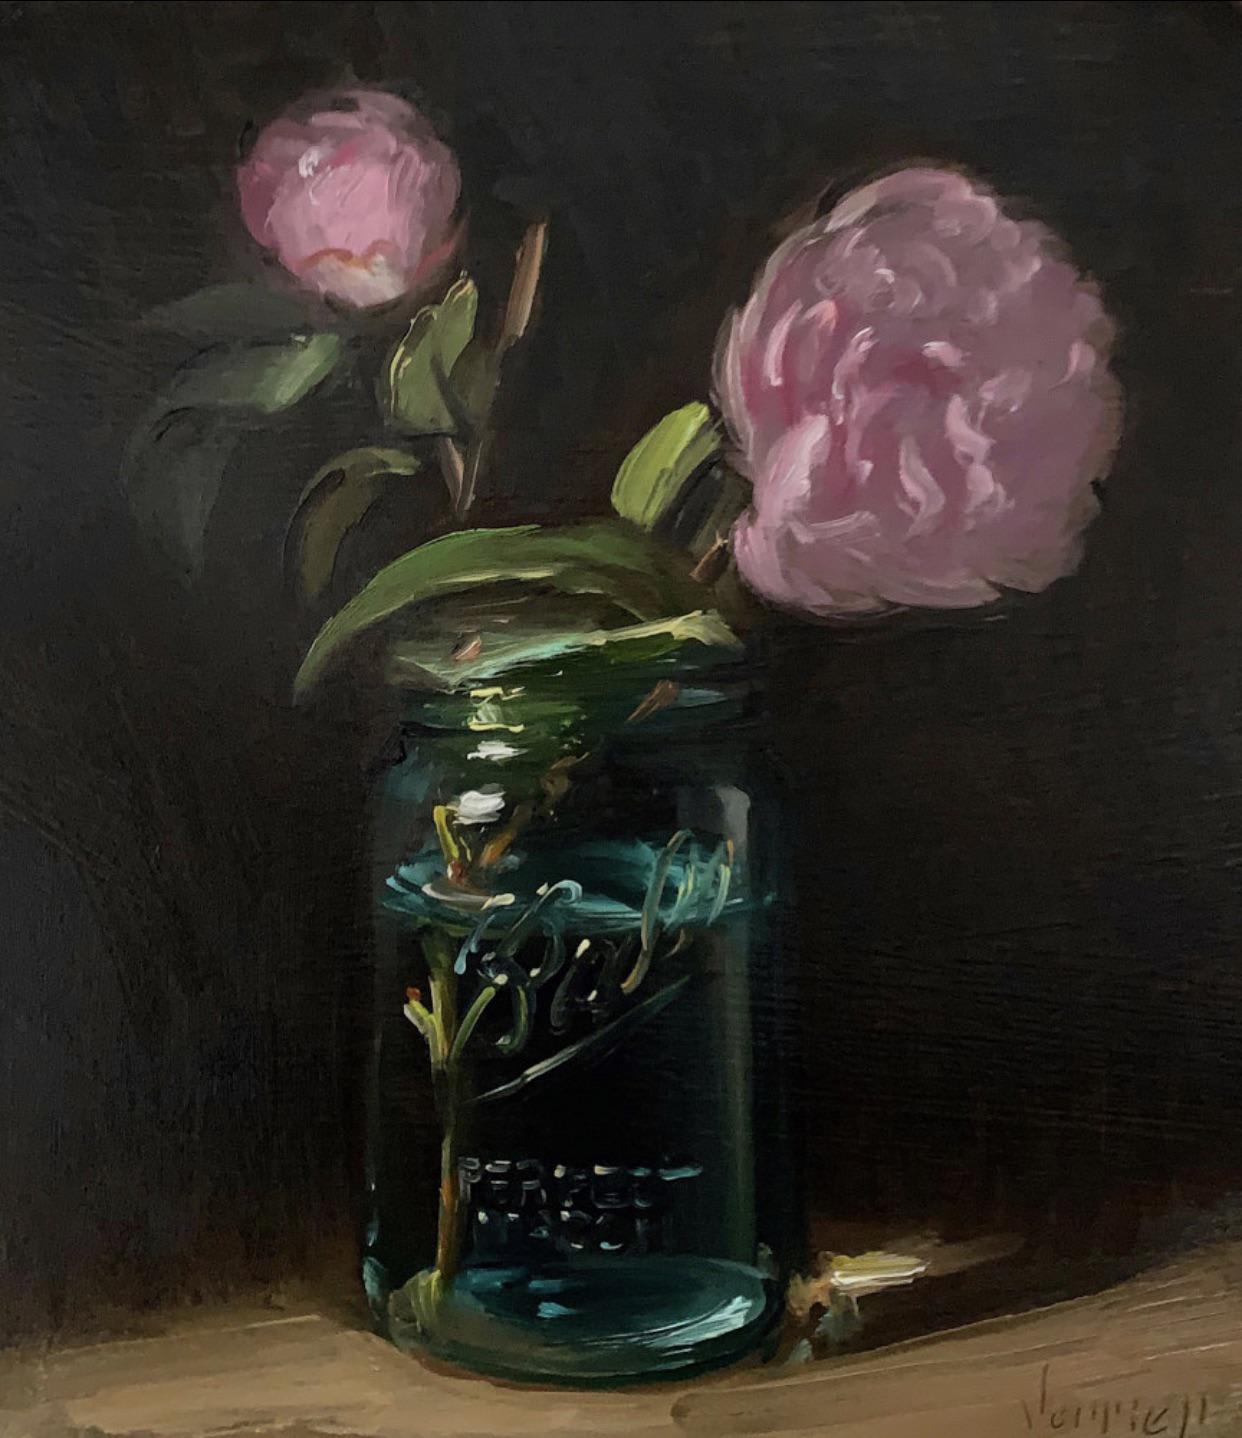 Camellias in a Vintage Ball Jar - oil painting by me